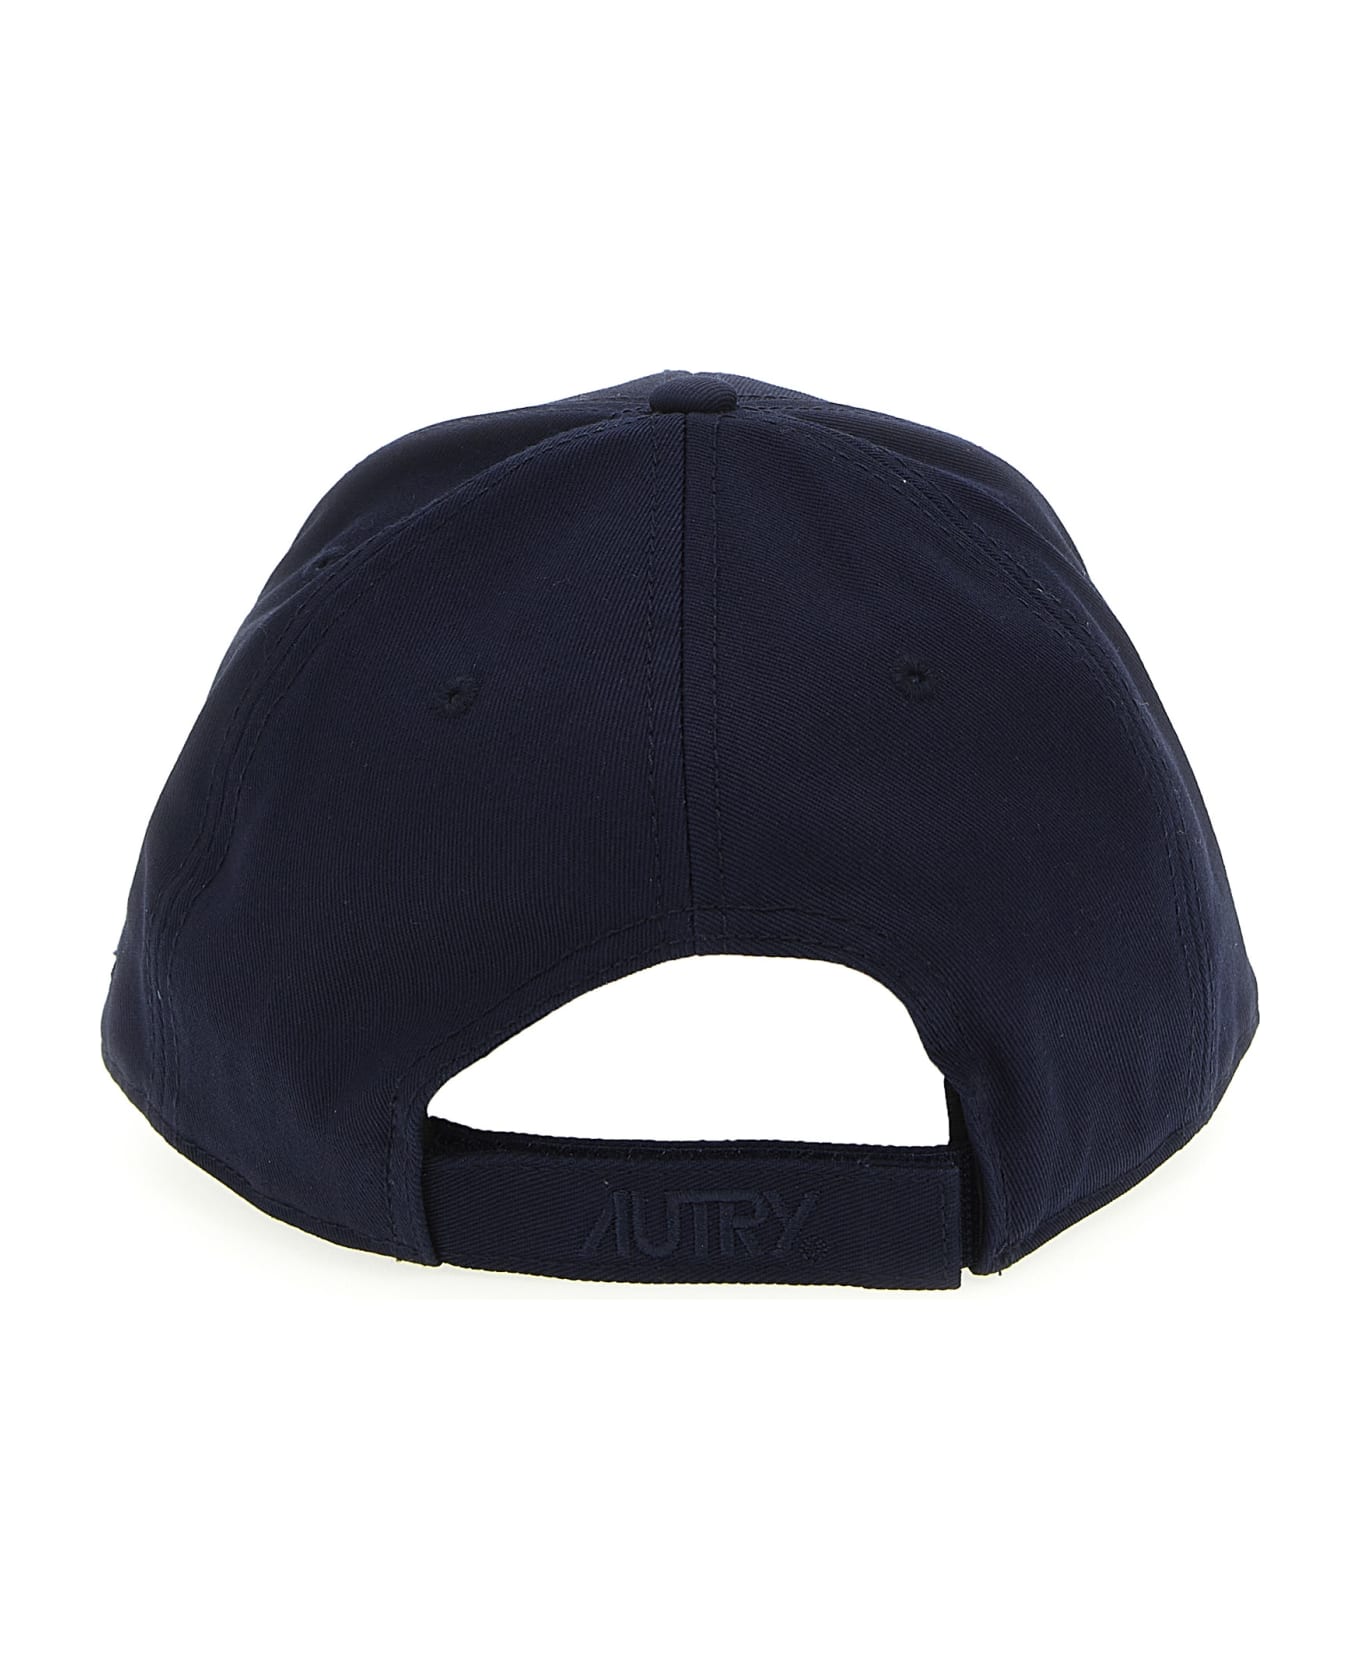 Autry Baseball Cap With Embroidered Logo - Blue